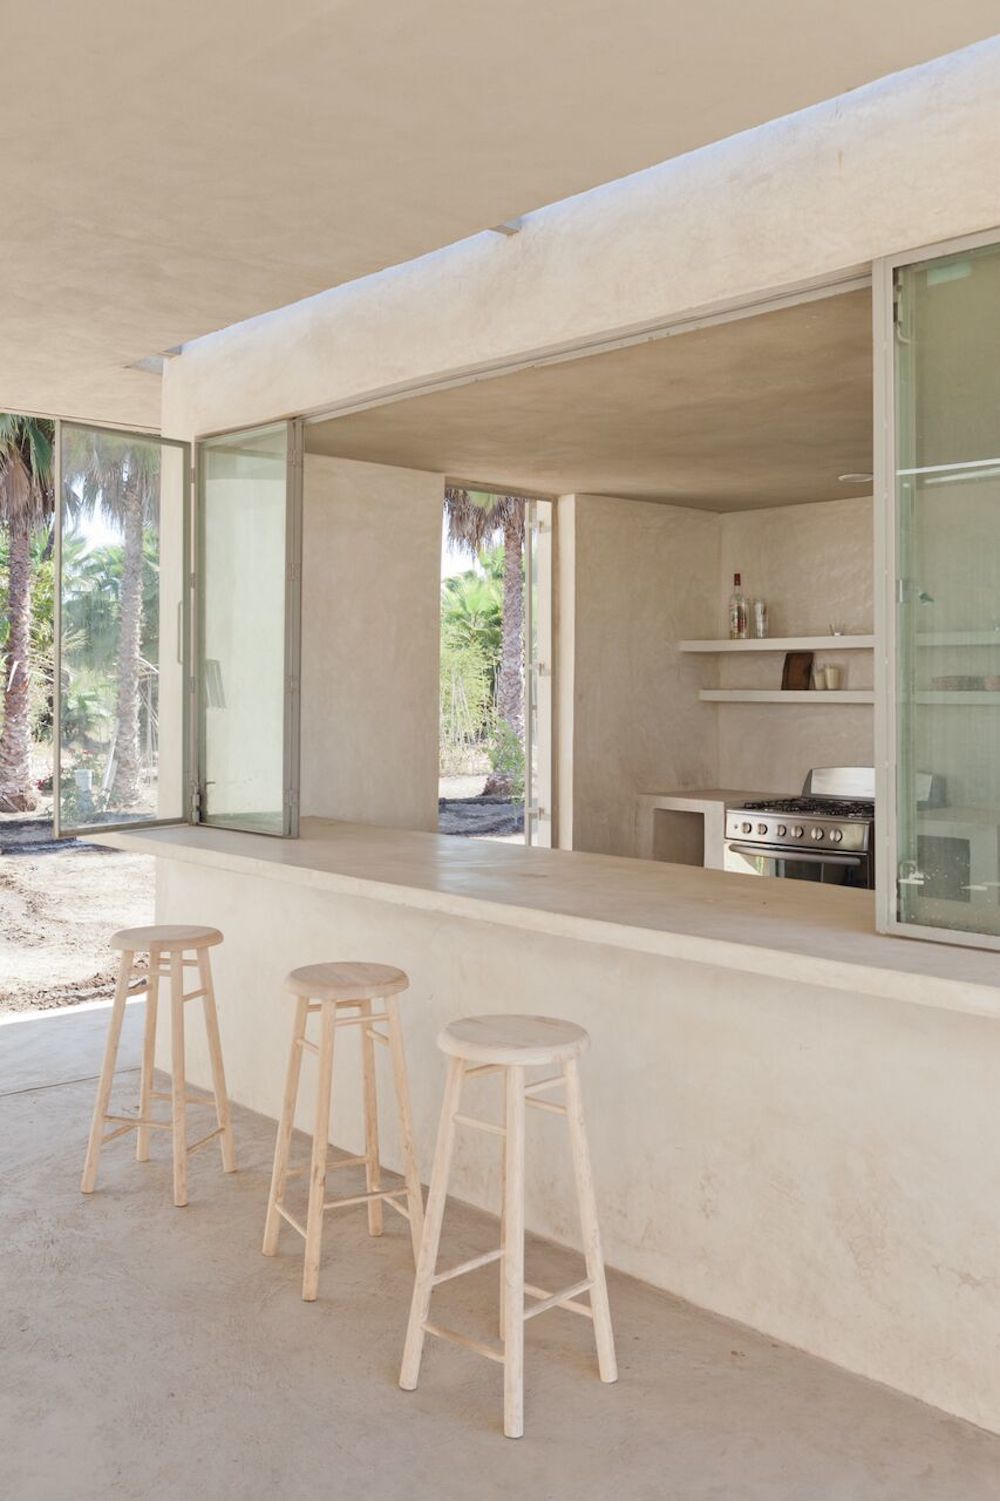 minimalist white outdoor kitchen made with stucco or plaster